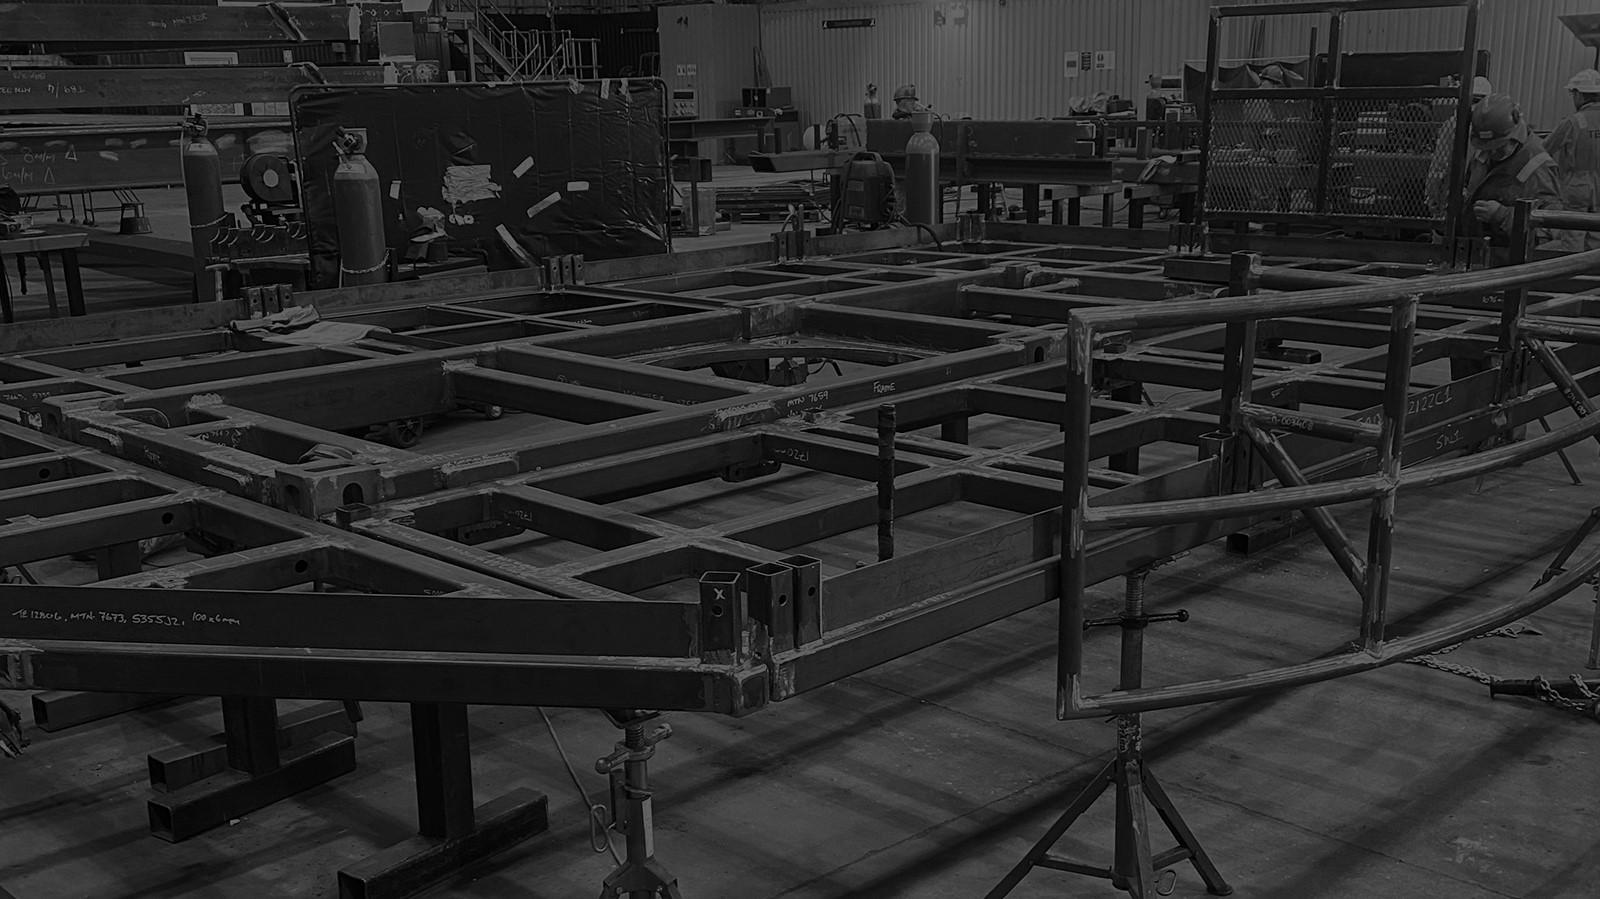 Design modifications and fabrication of a wireline slewing frame